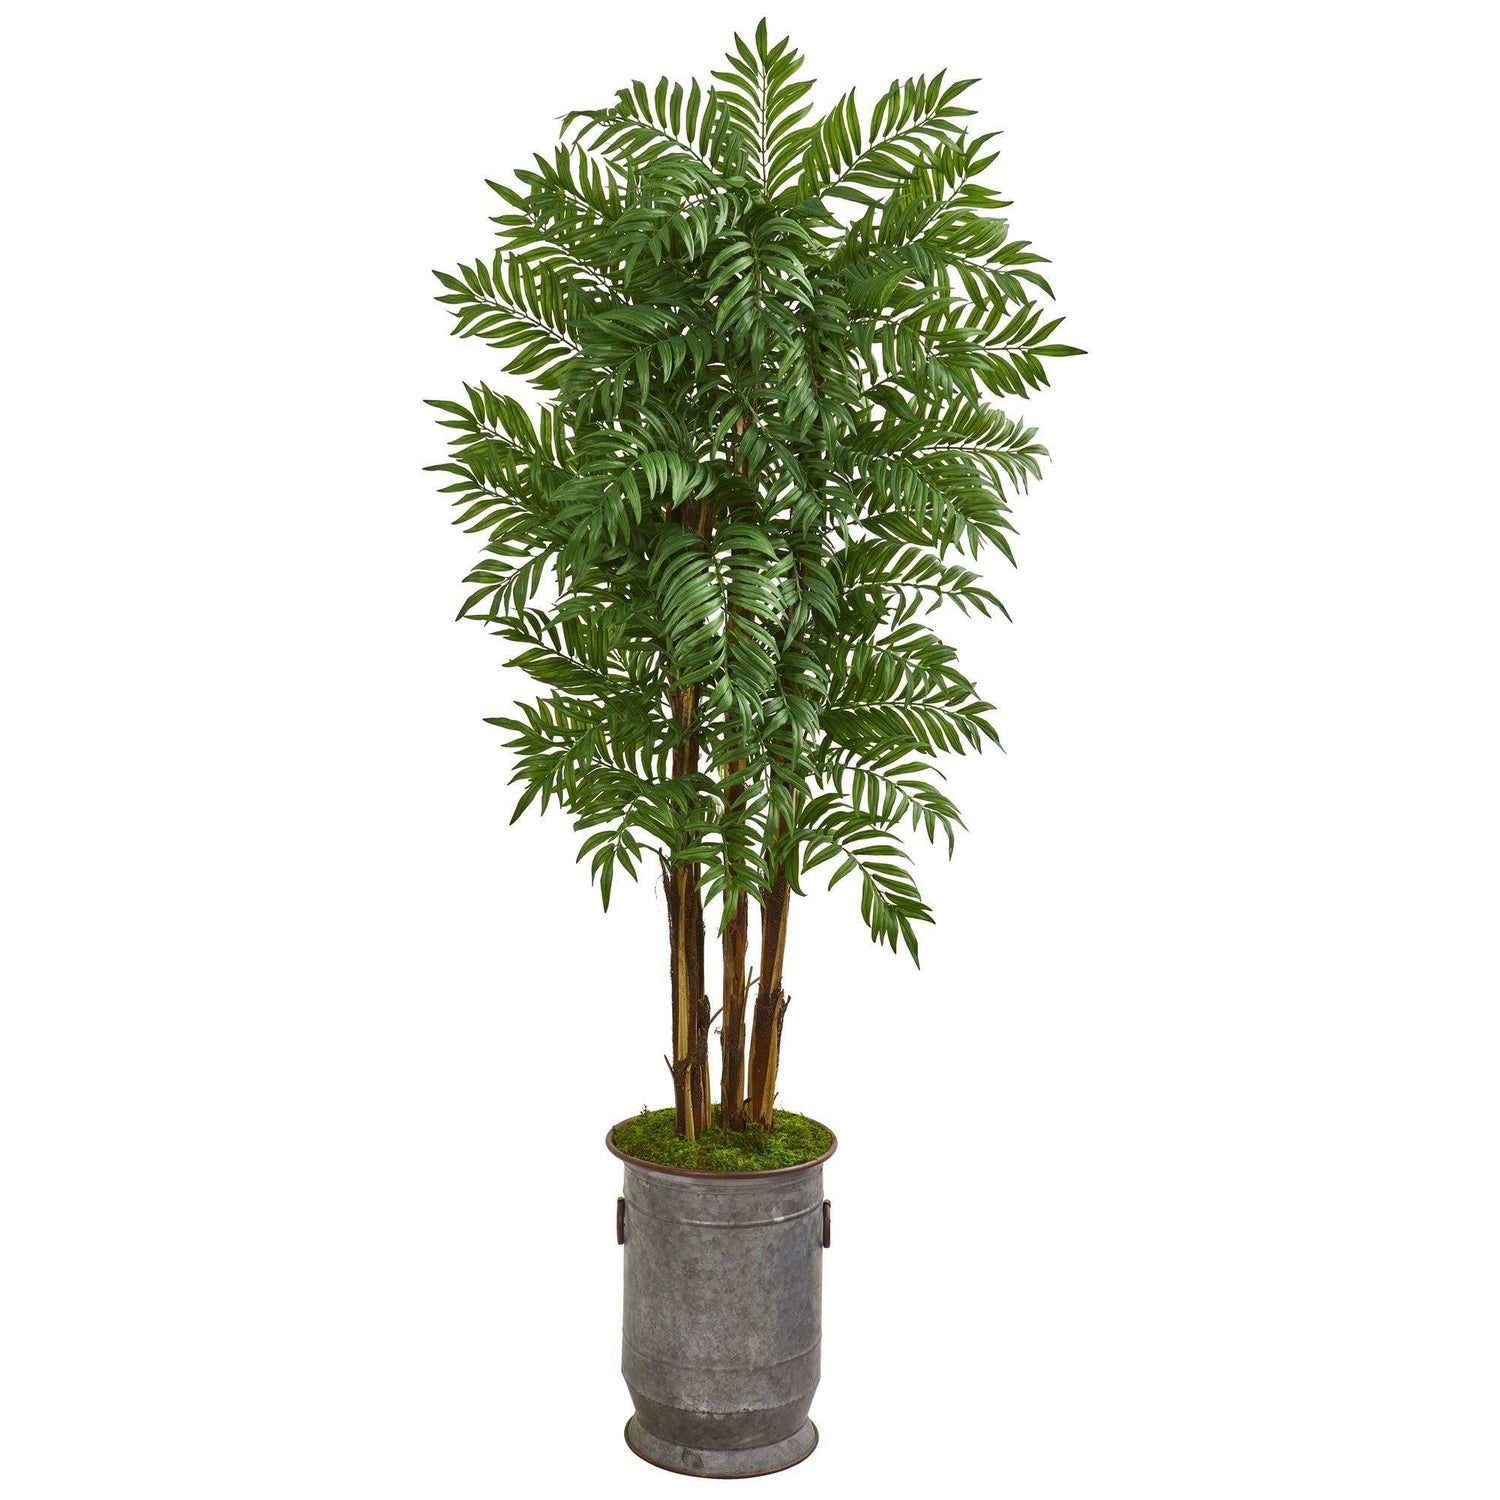 76” Parlour Artificial Palm Tree in Copper Trimmed Metal Planter